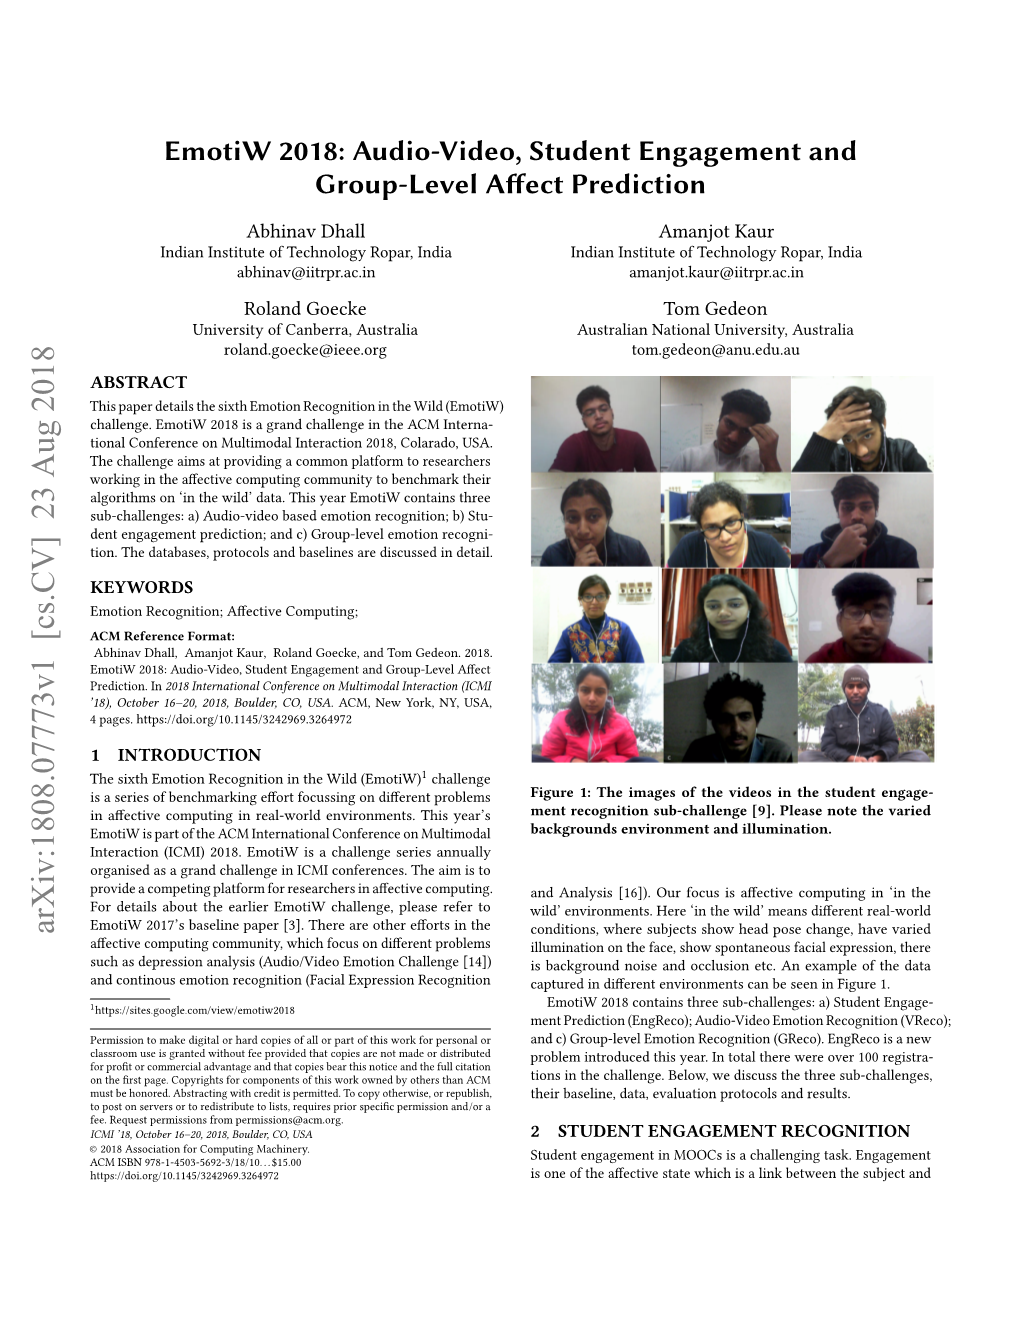 Emotiw 2018: Audio-Video, Student Engagement and Group-Level Affect Prediction